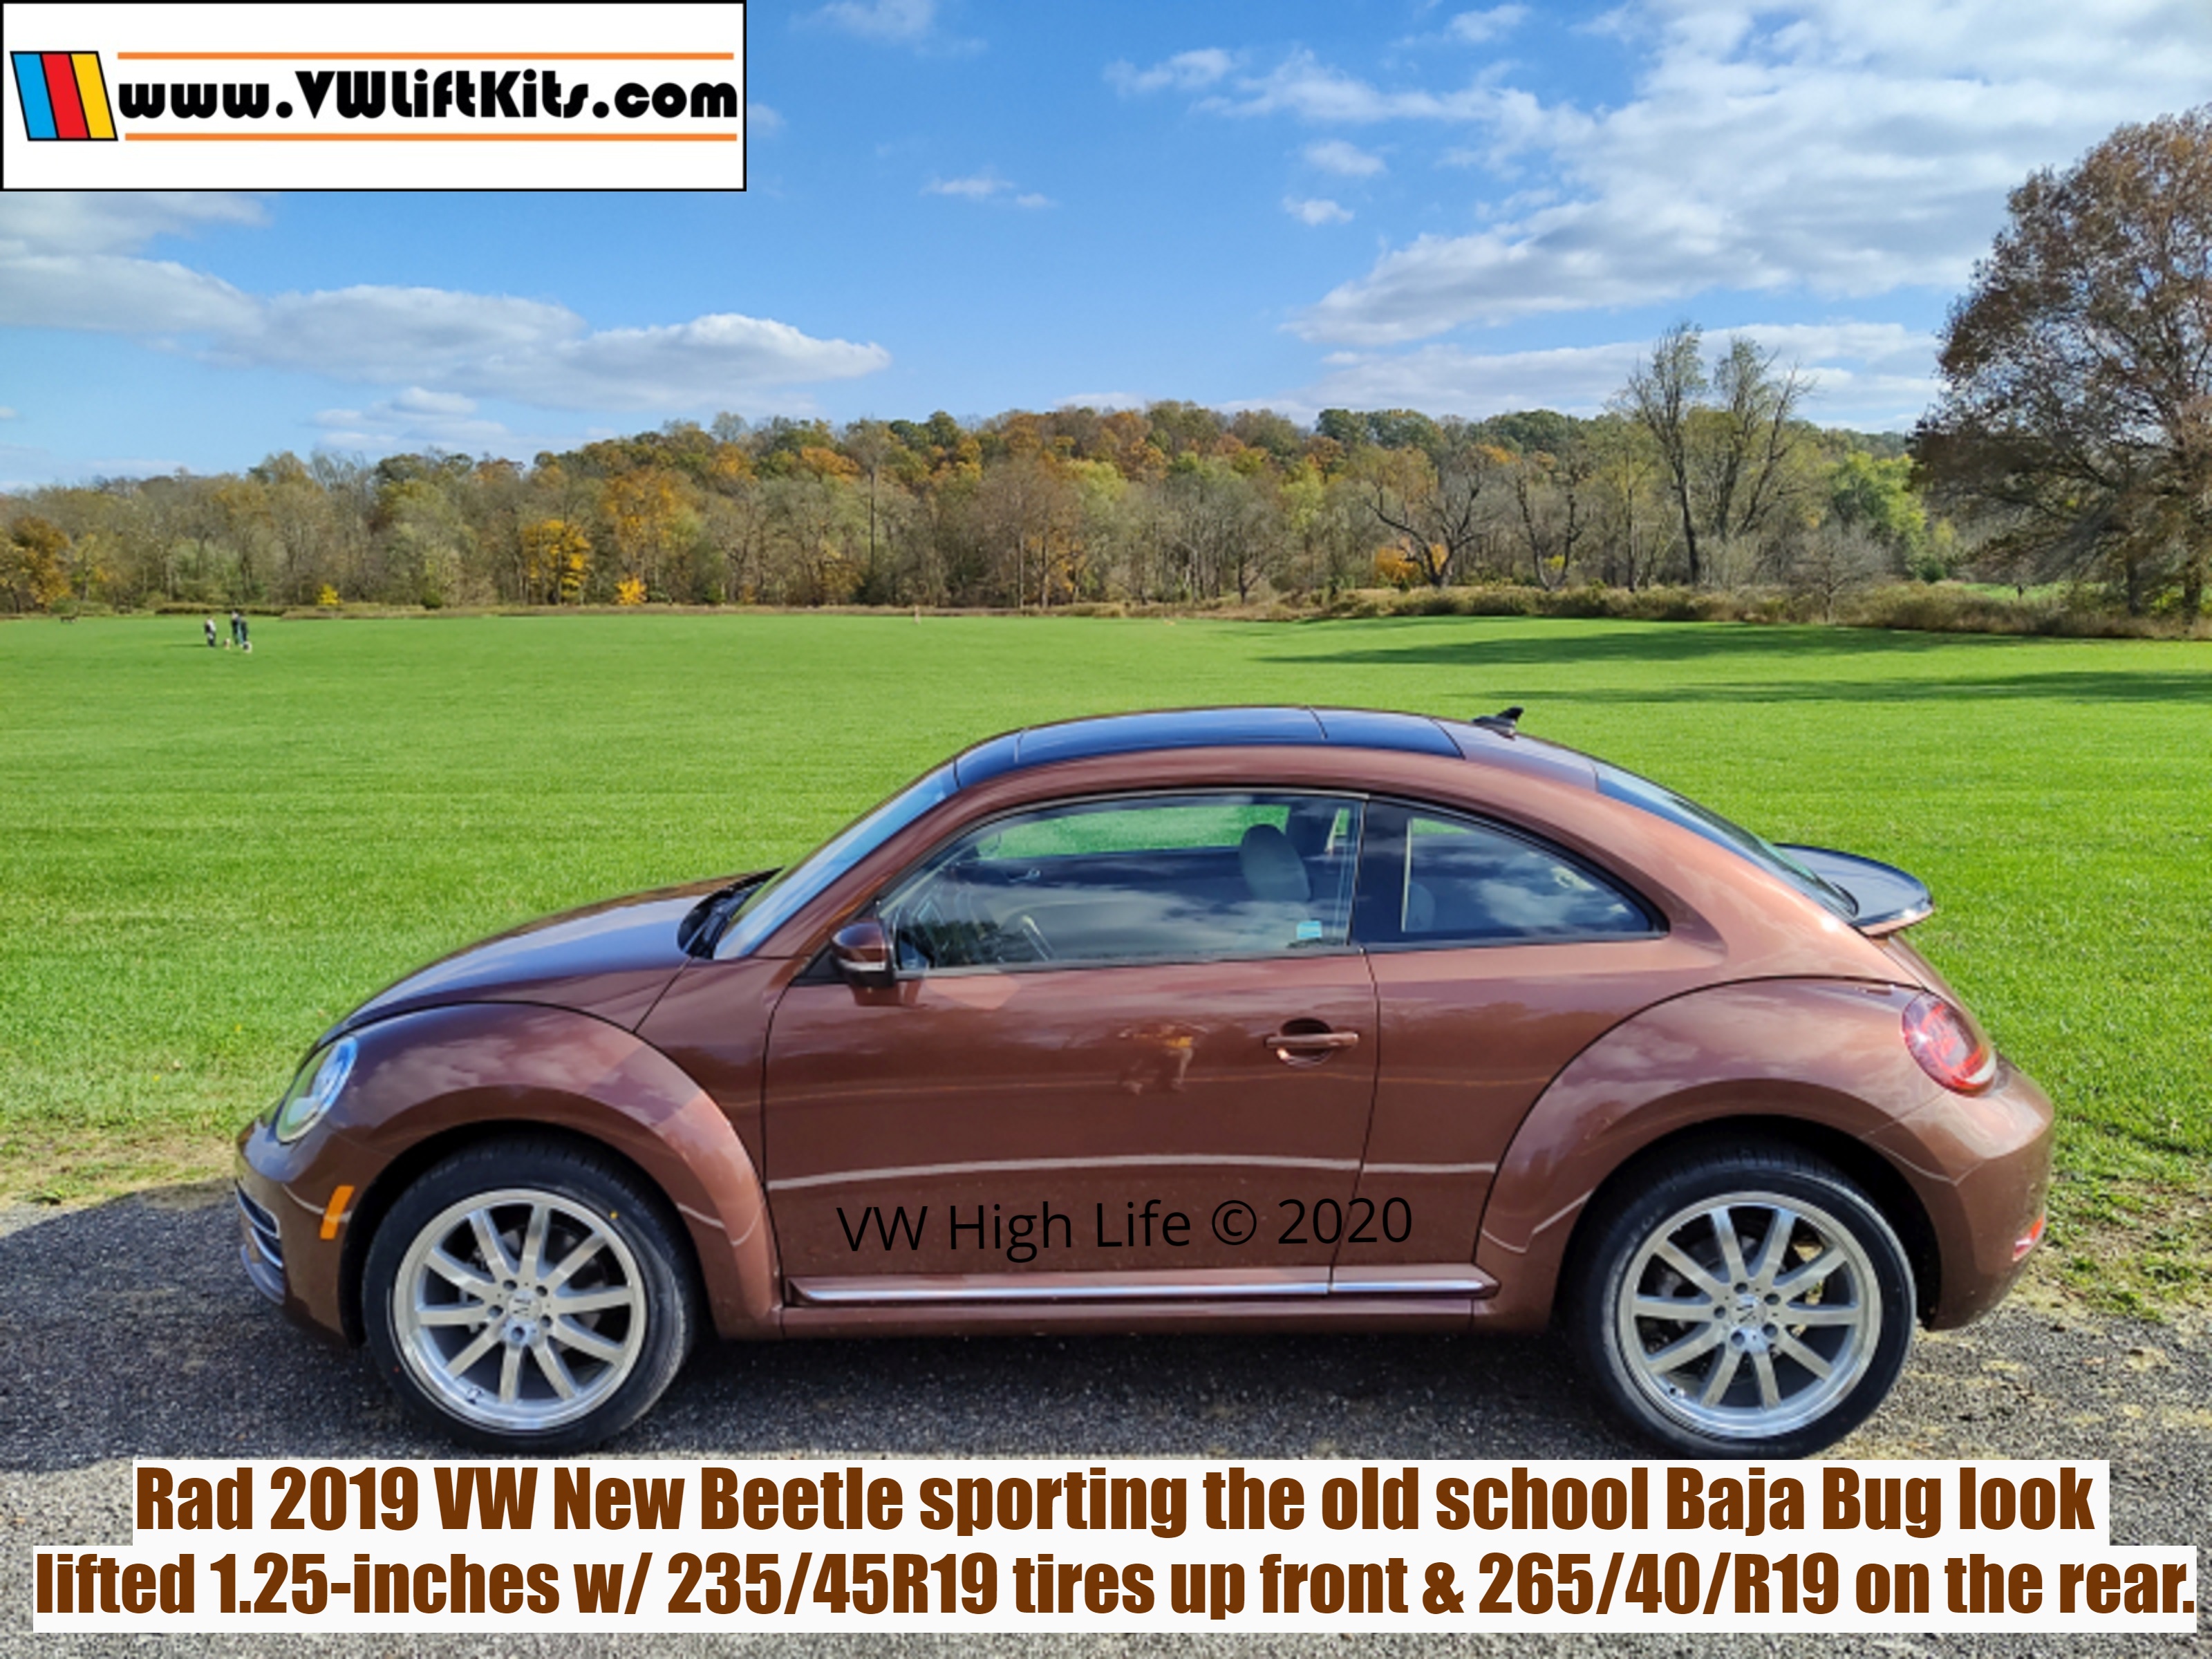 Super Cool VW New Beetle A5 lifted with 27-inch all season tires on 19-inch wheels!!